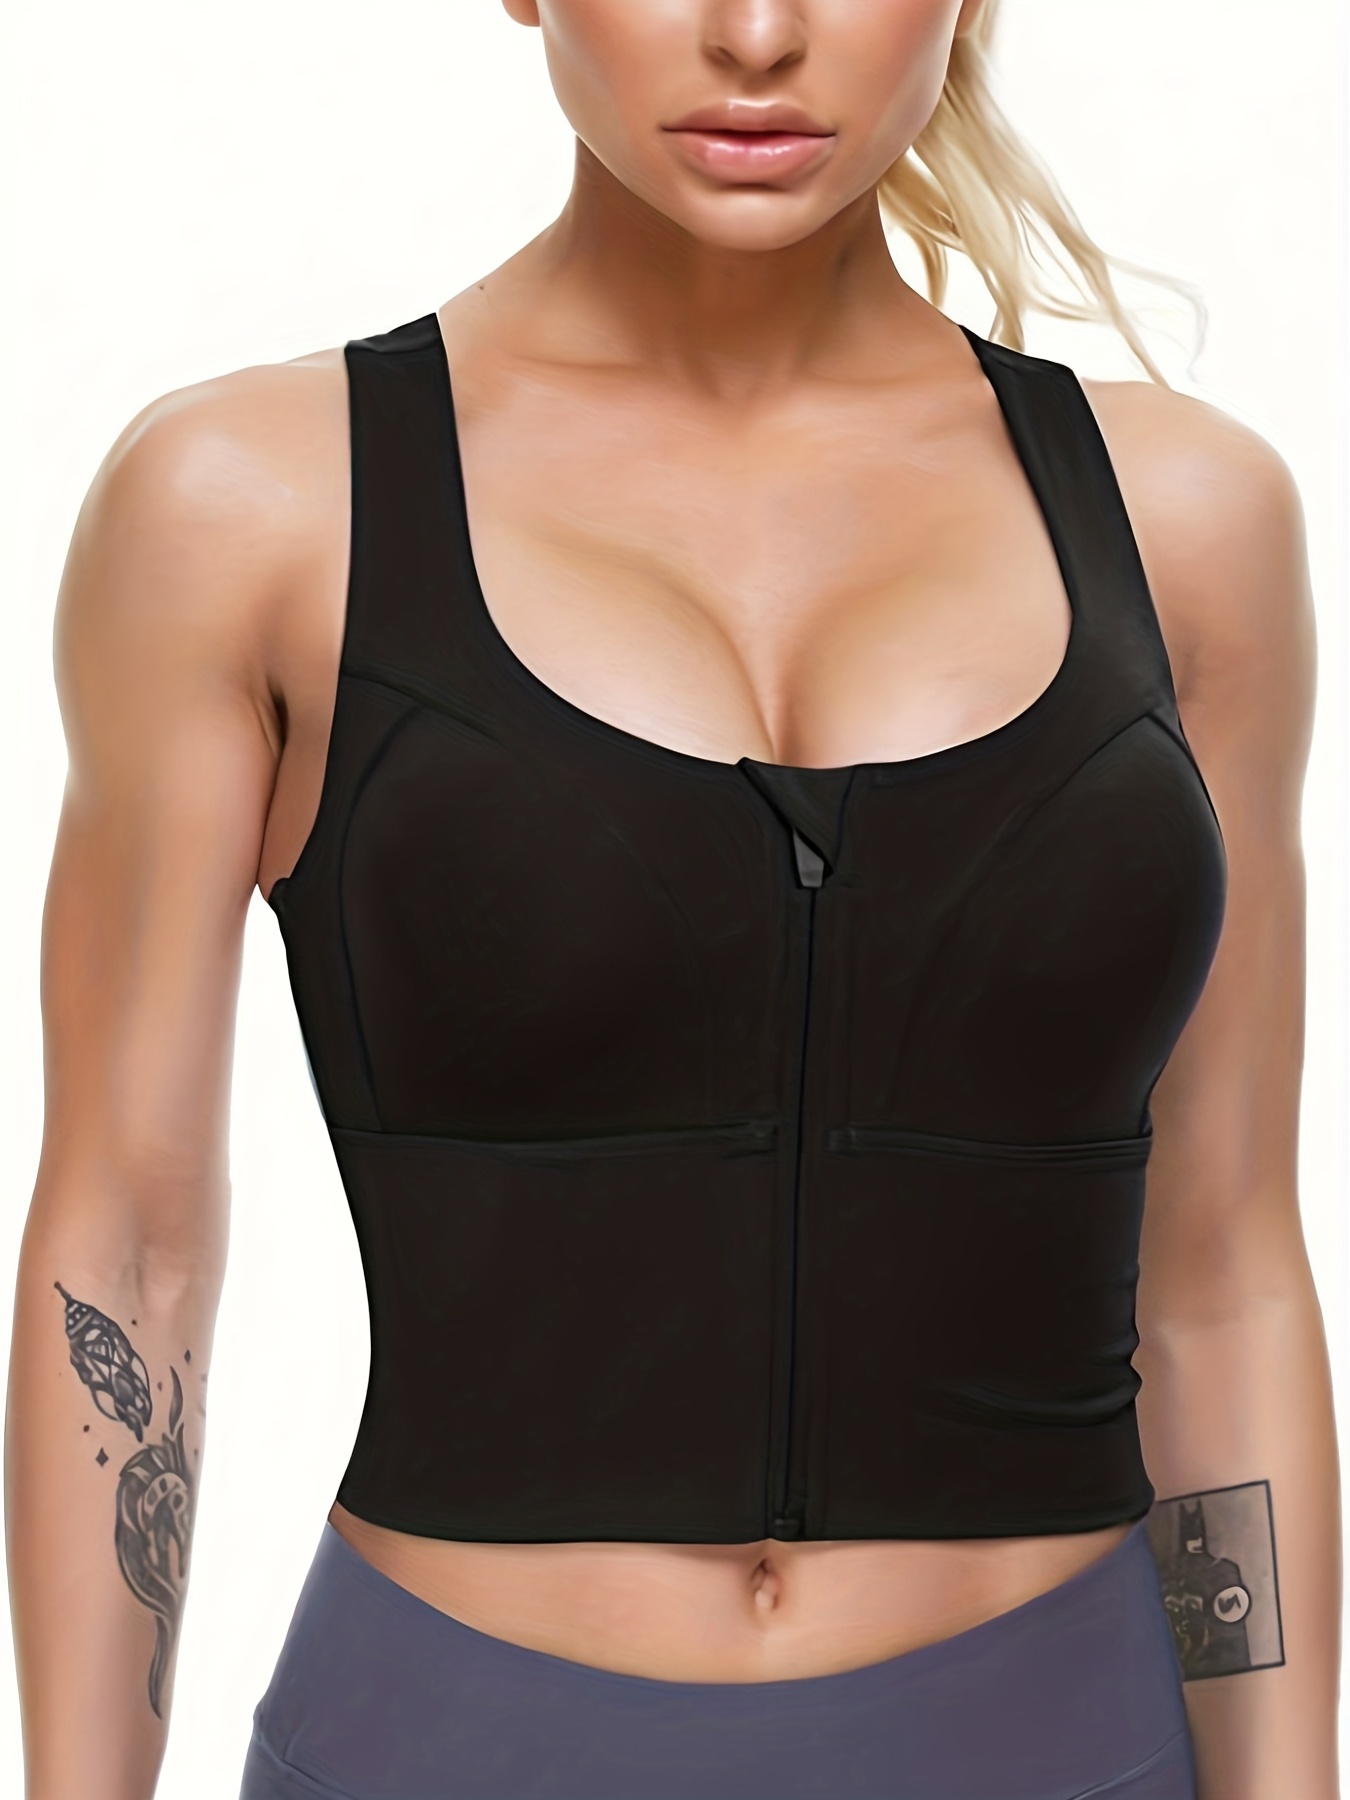 gvdentm Tank Tops With Built In Bras,Women's Gel Touch Padded